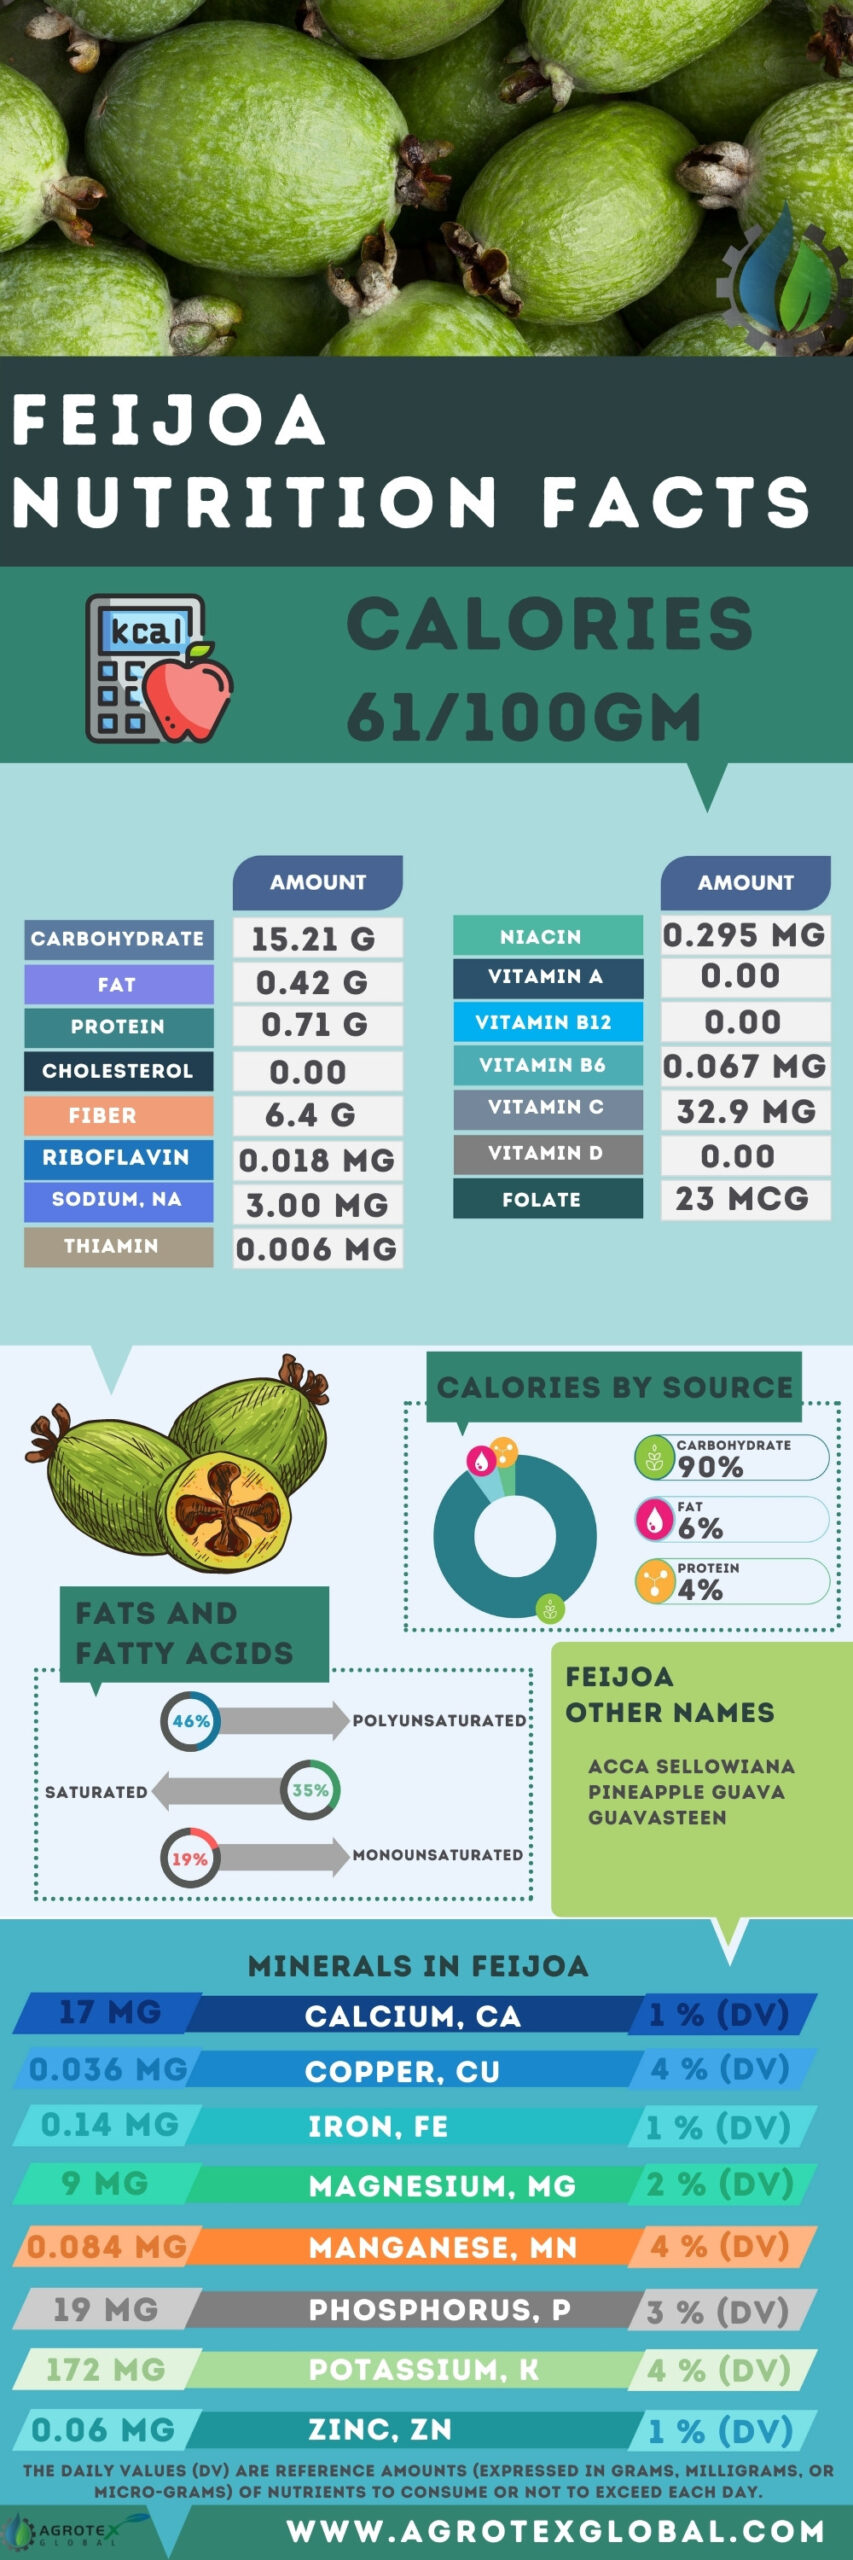 Feijoa NUTRITION FACTS calorie chart infographic